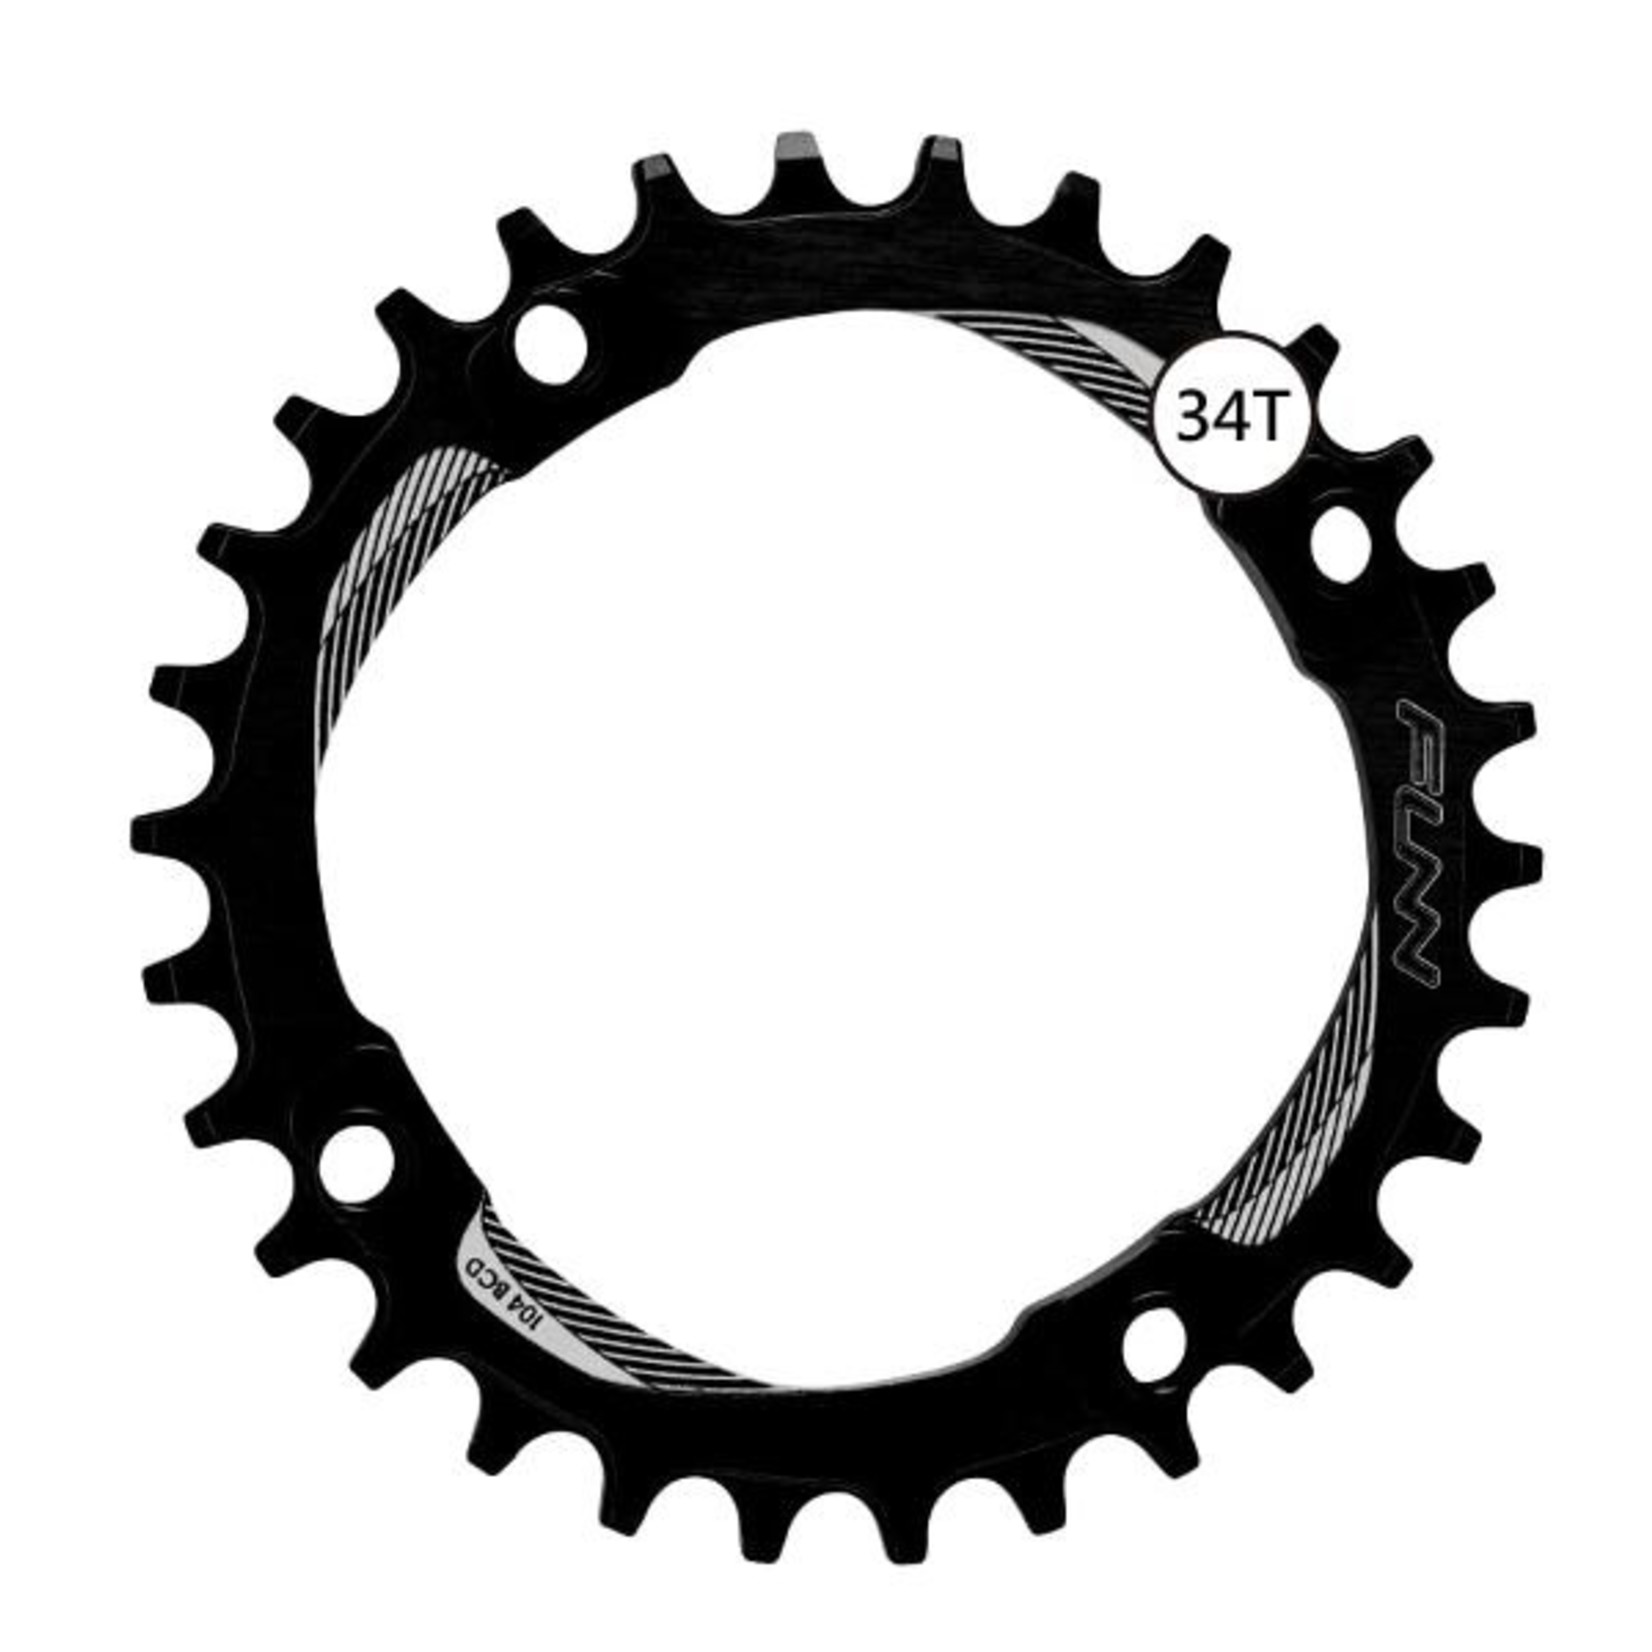 FUNN Funn Bicycle Chain Ring - Solo Narrow-Wide - 34T - 104mm BCD - Black